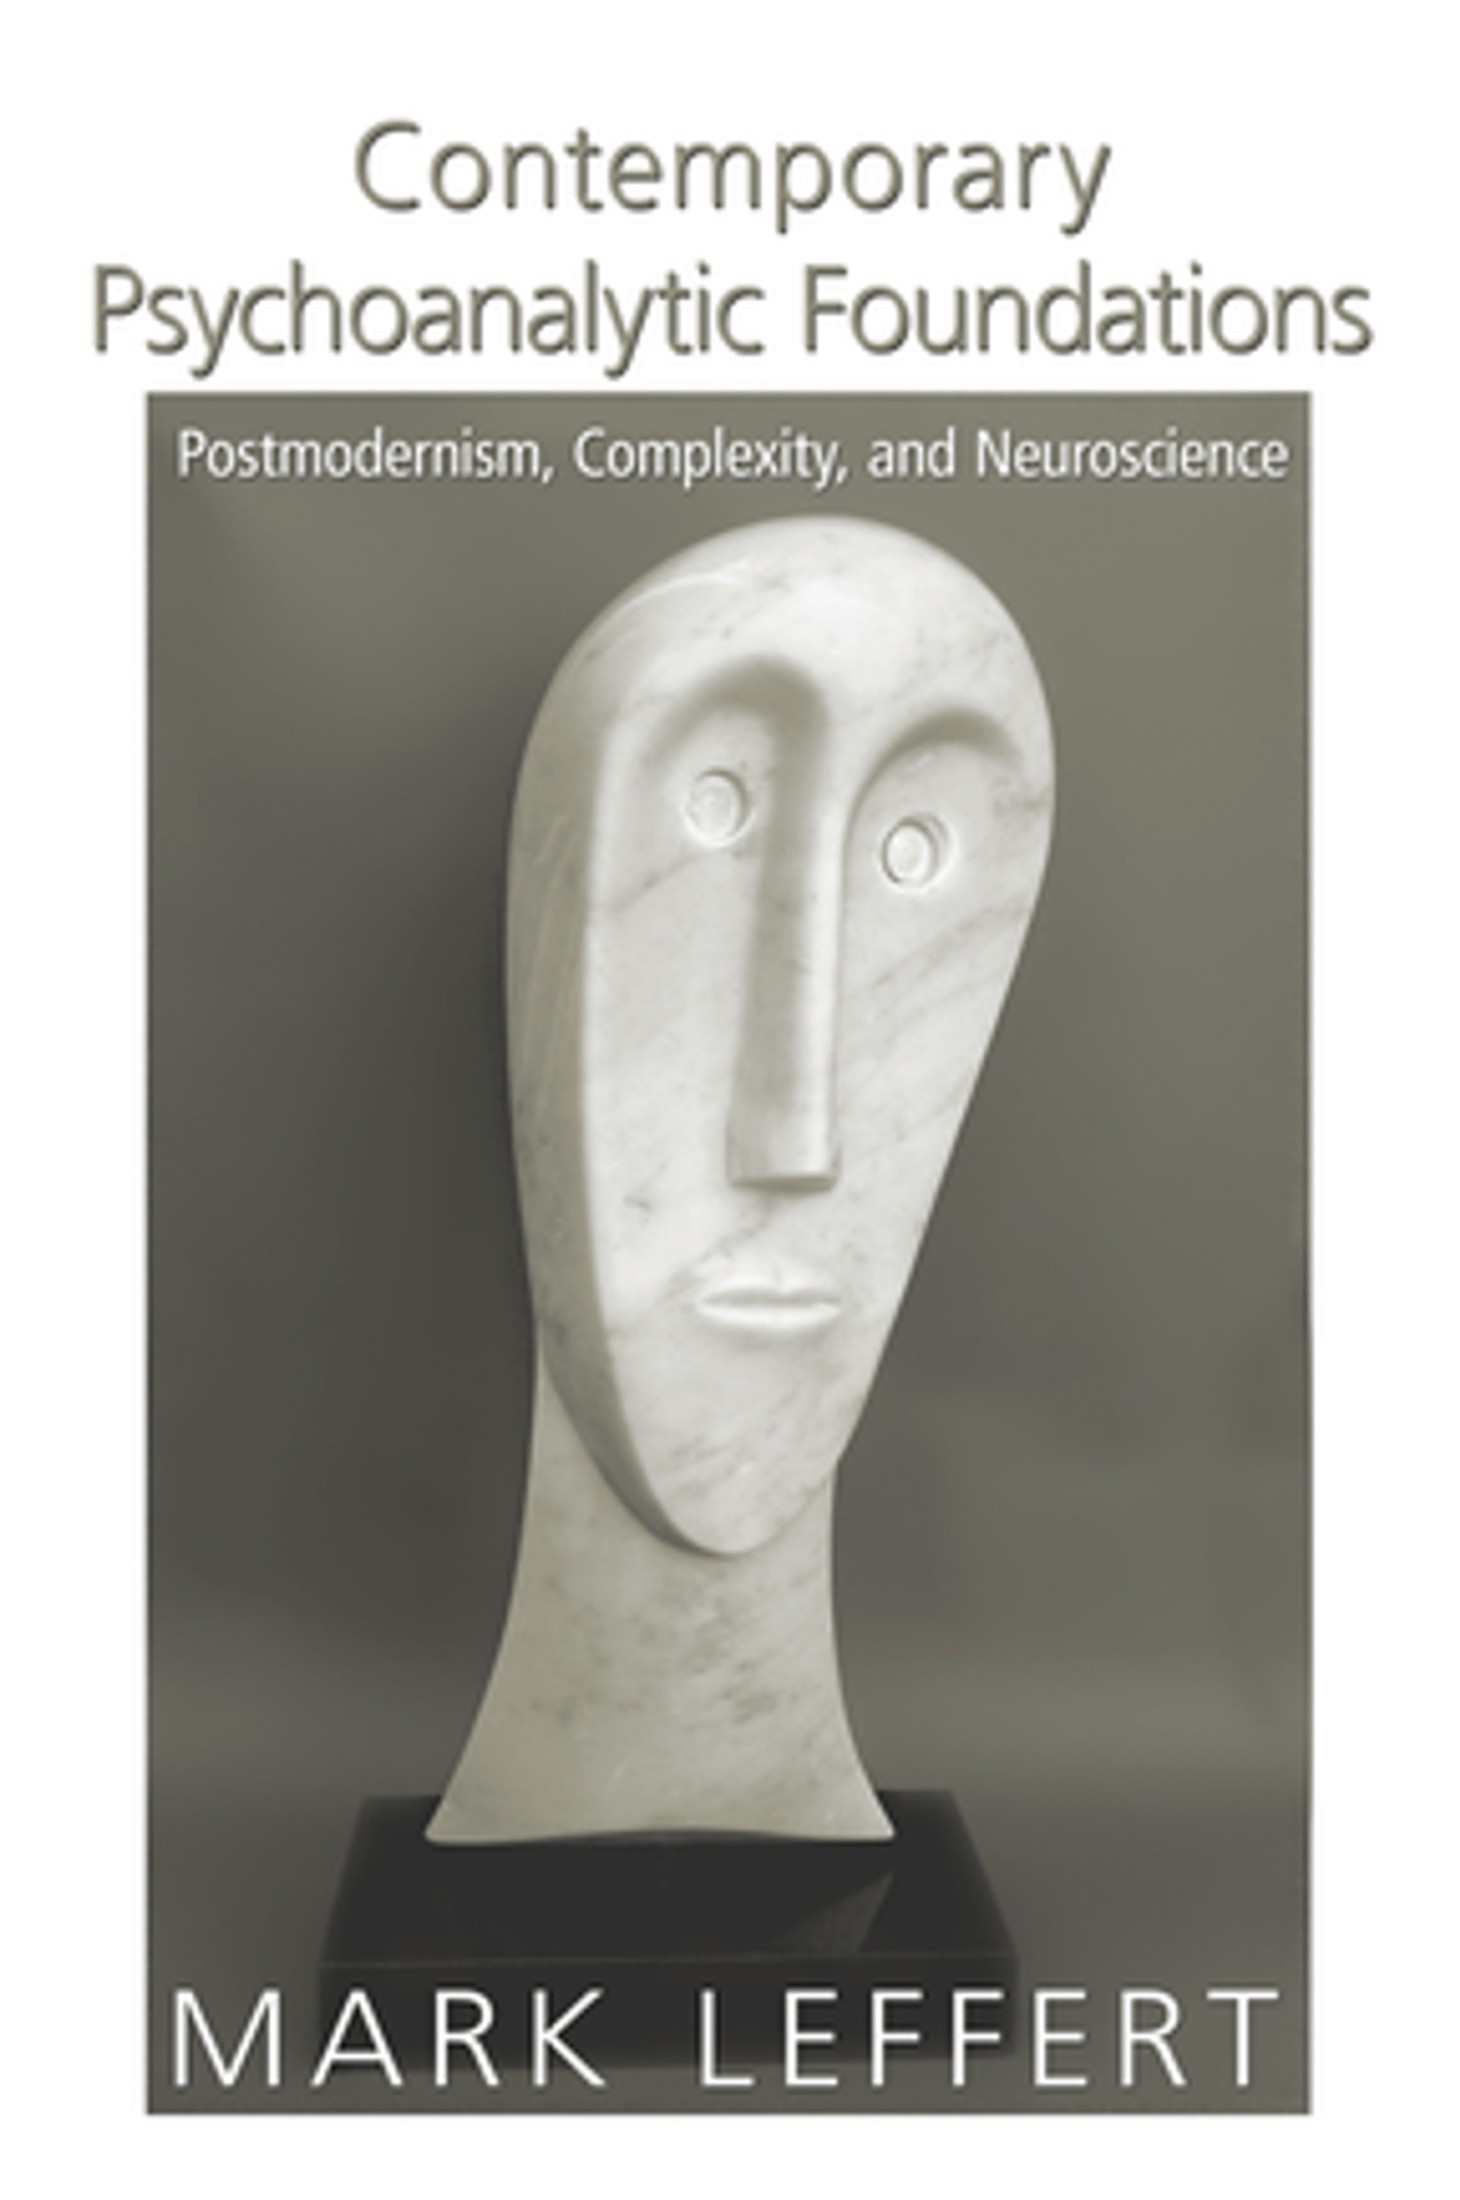 Contemporary Psychoanalytic Foundations: Postmodernism, Complexity, and Neuroscience